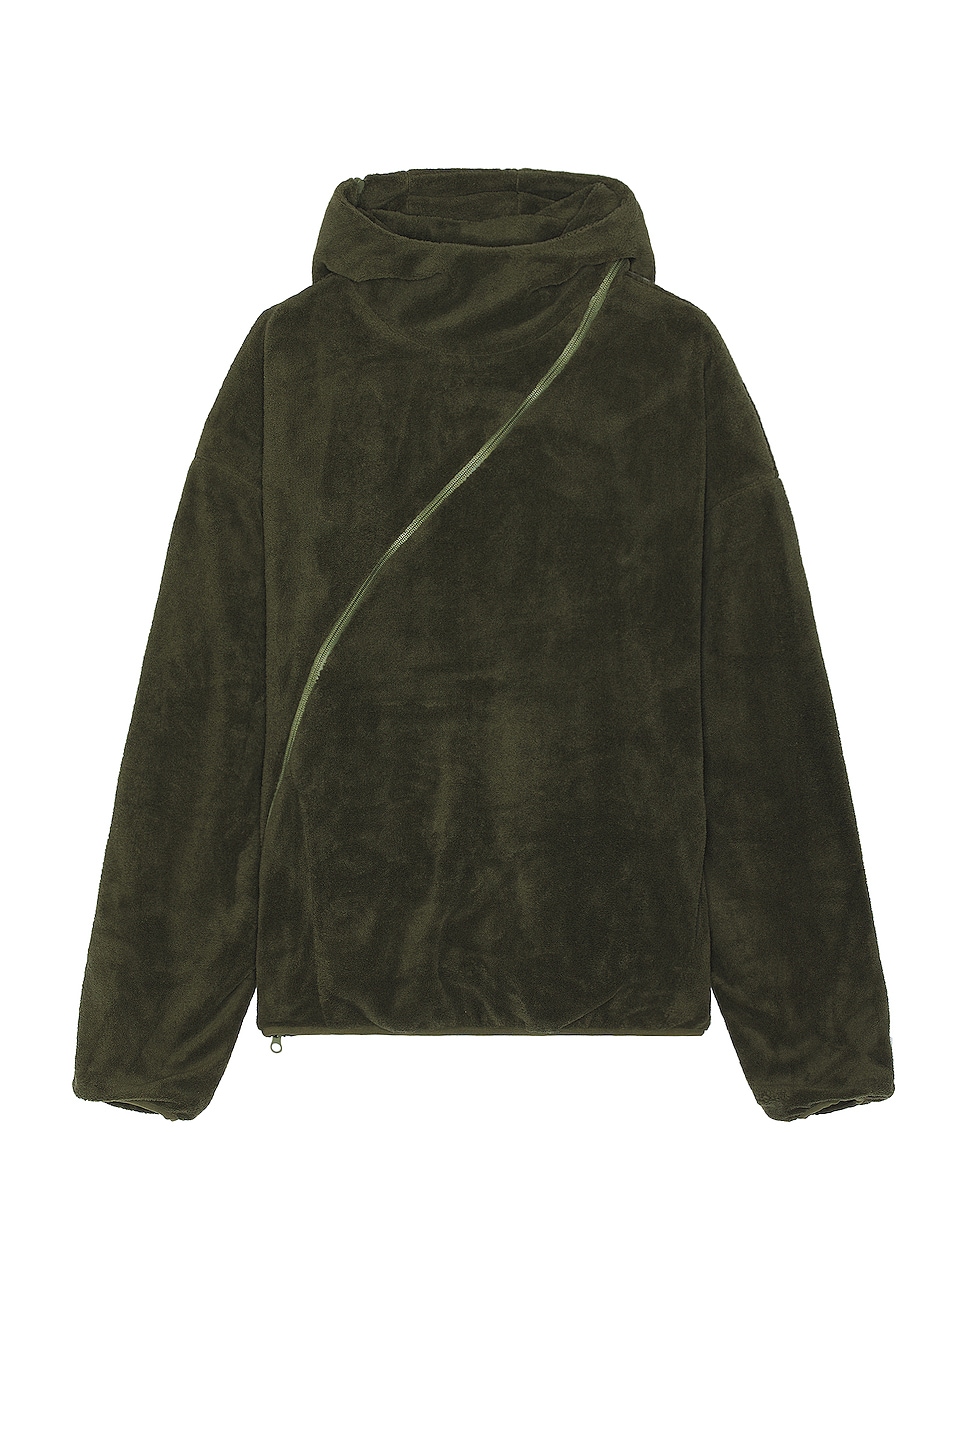 Image 1 of POST ARCHIVE FACTION (PAF) 5.1 Hoodie Center in OLIVE GREEN